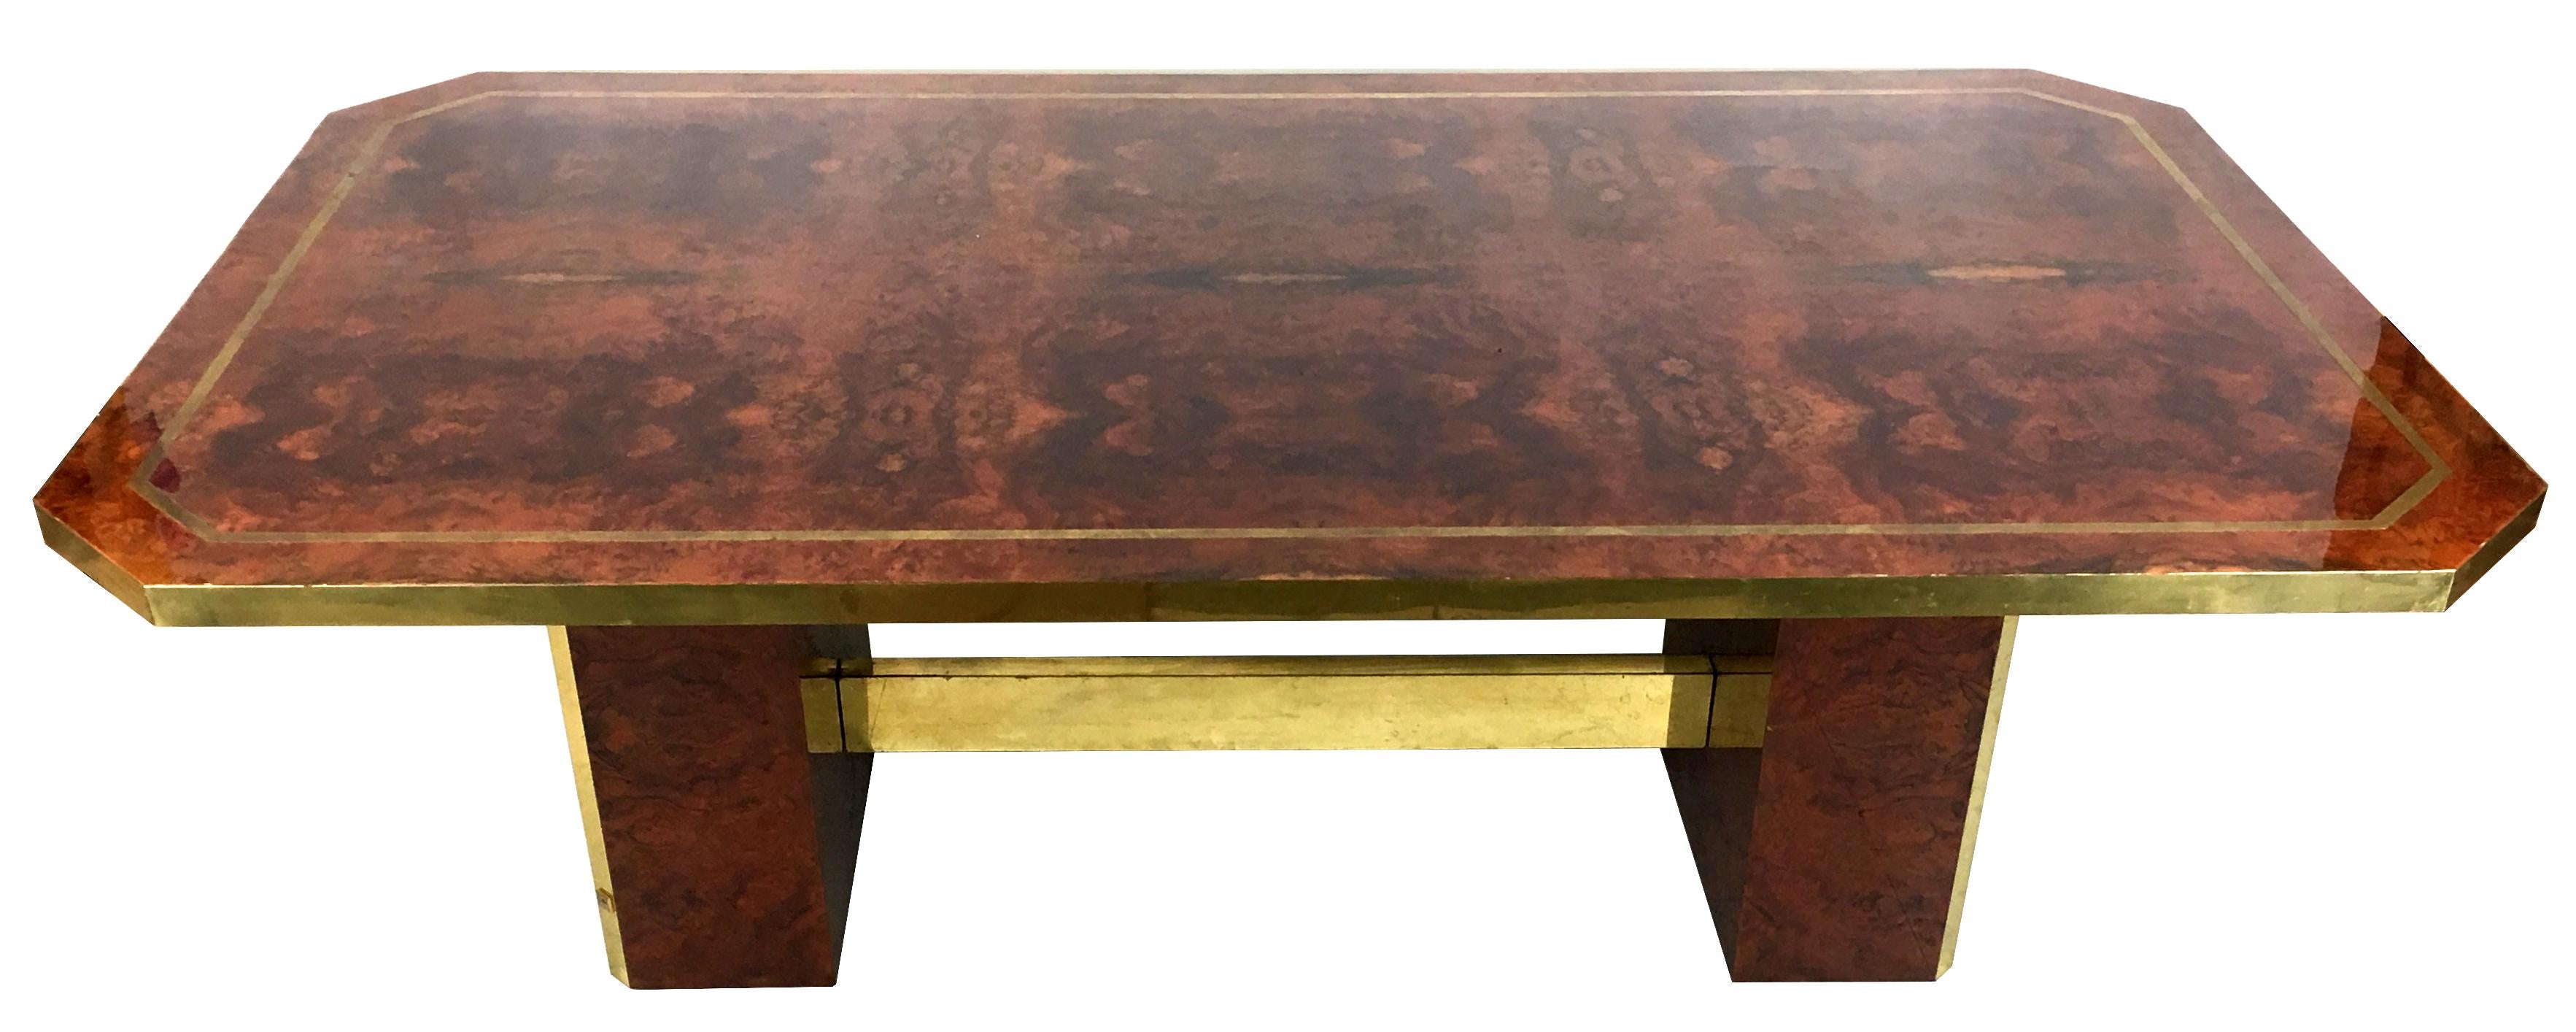 Super chic 1980s dining table in cedar burl with brass trim by Jean-Claude Mahey. The vibrant matched grain burl top is bordered in brass with brass edges and the stretcher is clad in brass. The twin pedestals are also burl, trimmed in brass and the